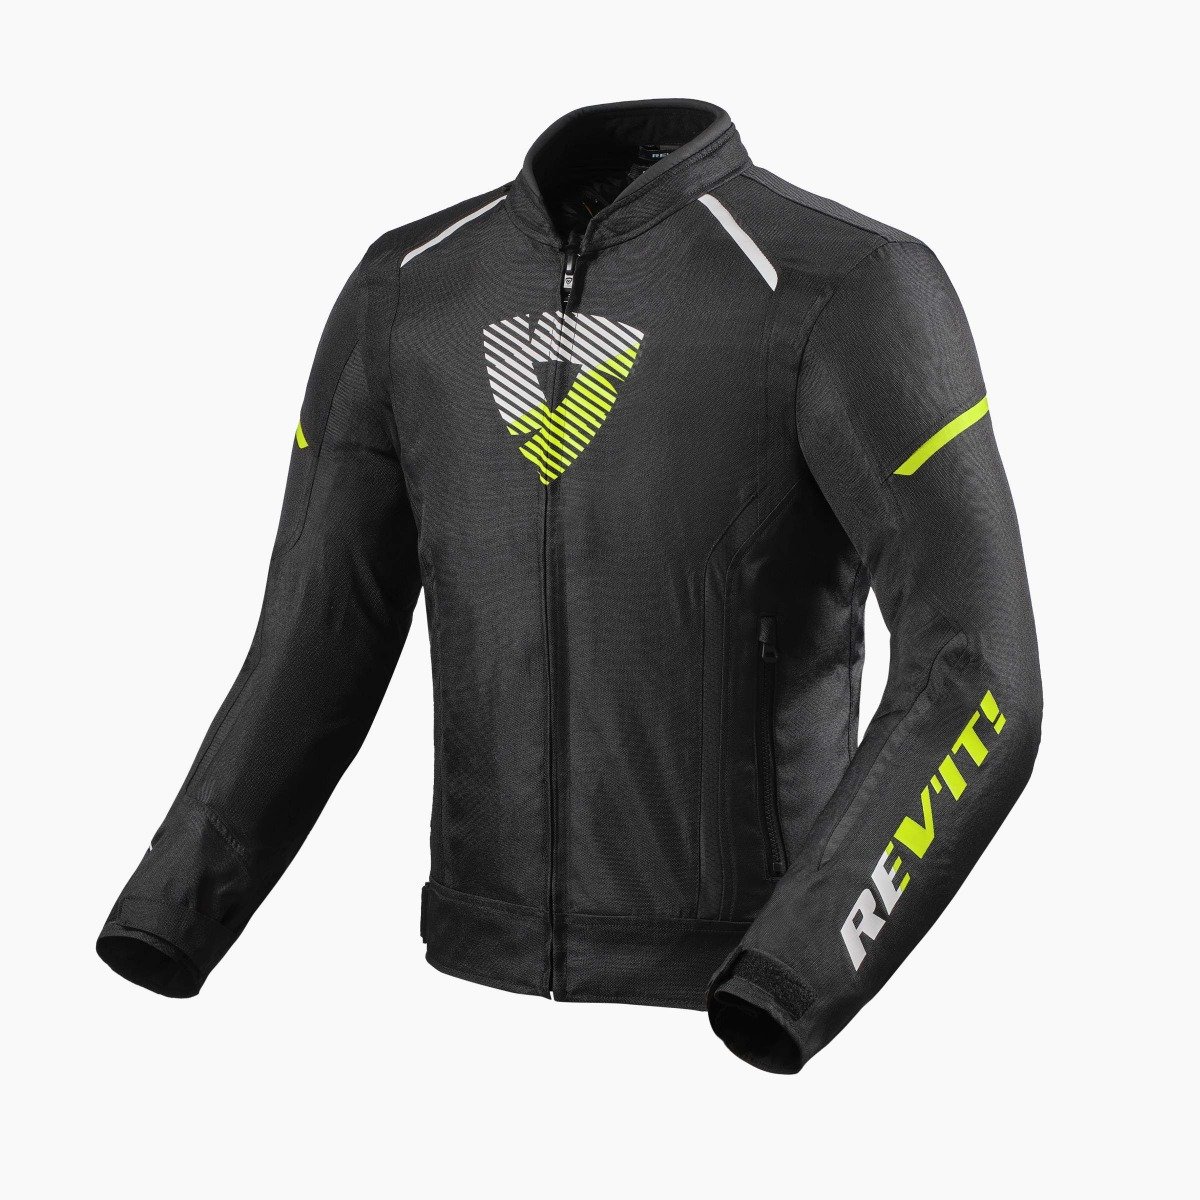 Image of REV'IT! Sprint H2O Jacket Black Neon Yellow Size L ID 8700001311892